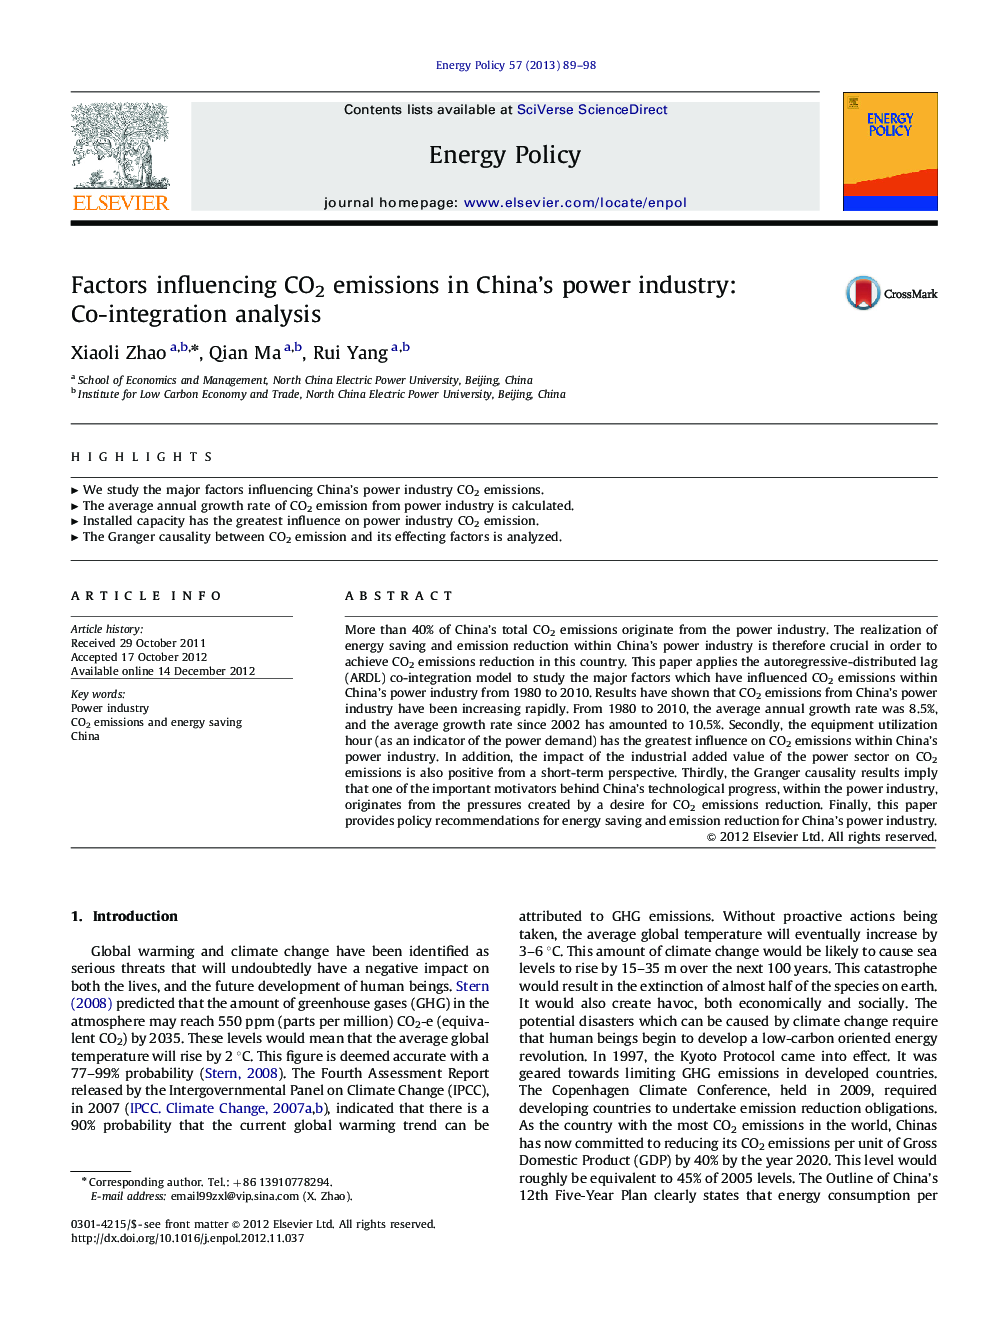 Factors influencing CO2 emissions in China's power industry: Co-integration analysis